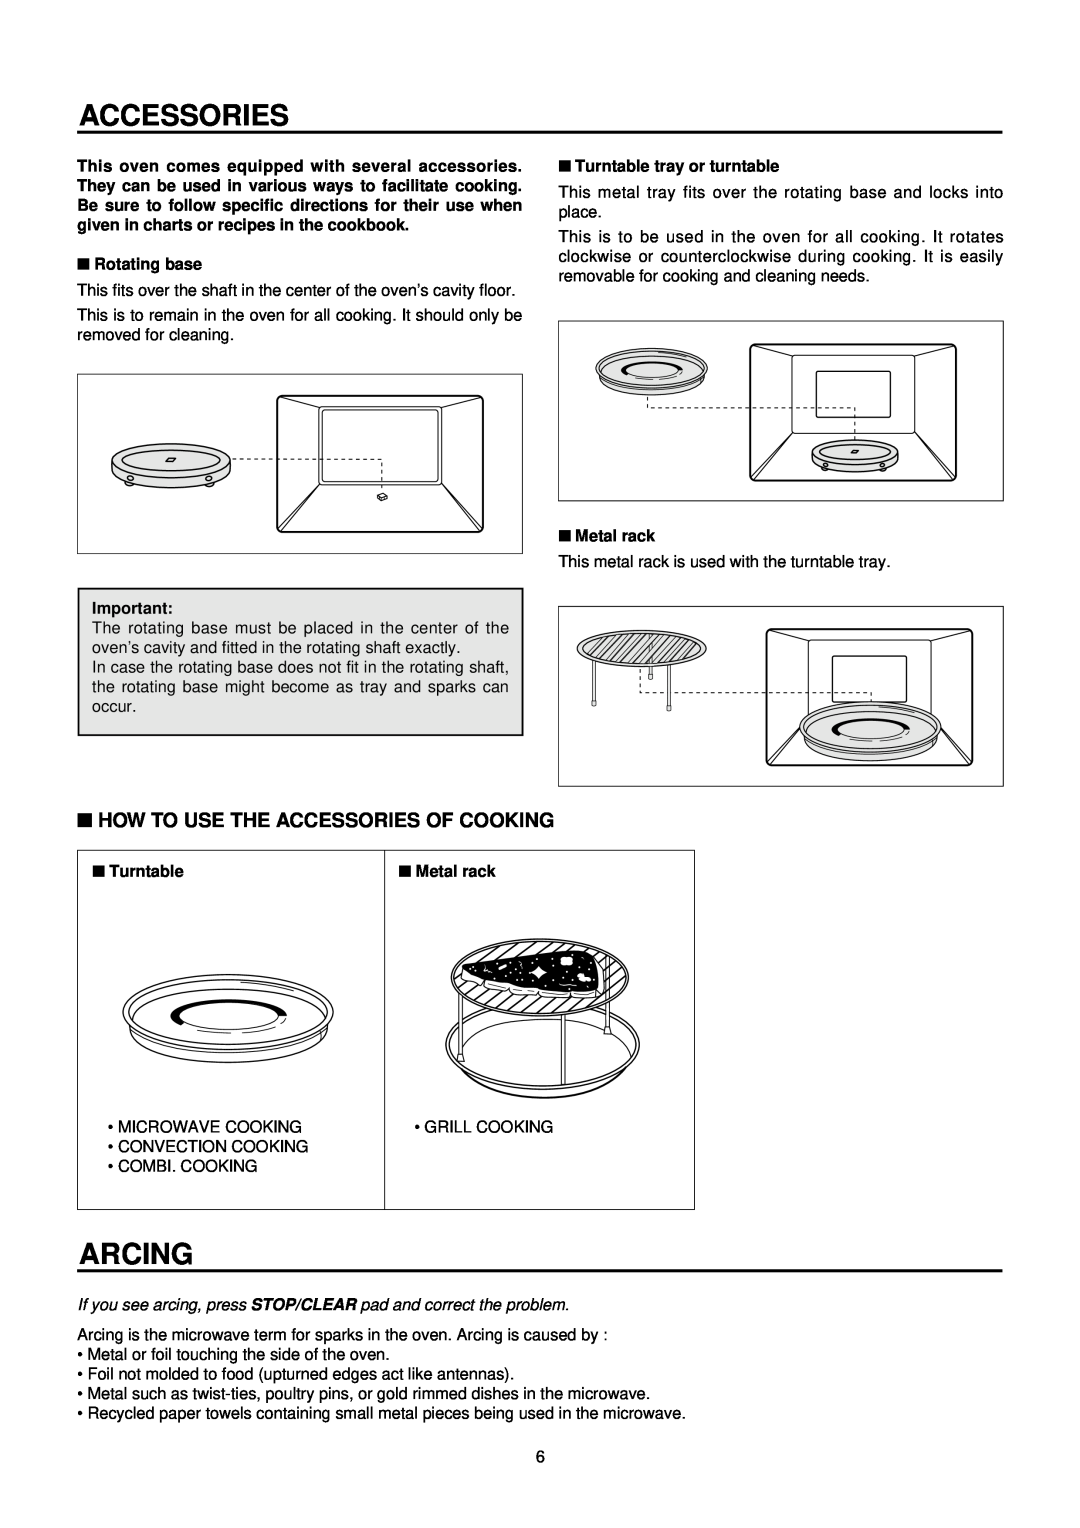 Daewoo KOC-873TSL manual Arcing, How To Use The Accessories Of Cooking, Rotating base, Turntable tray or turntable 